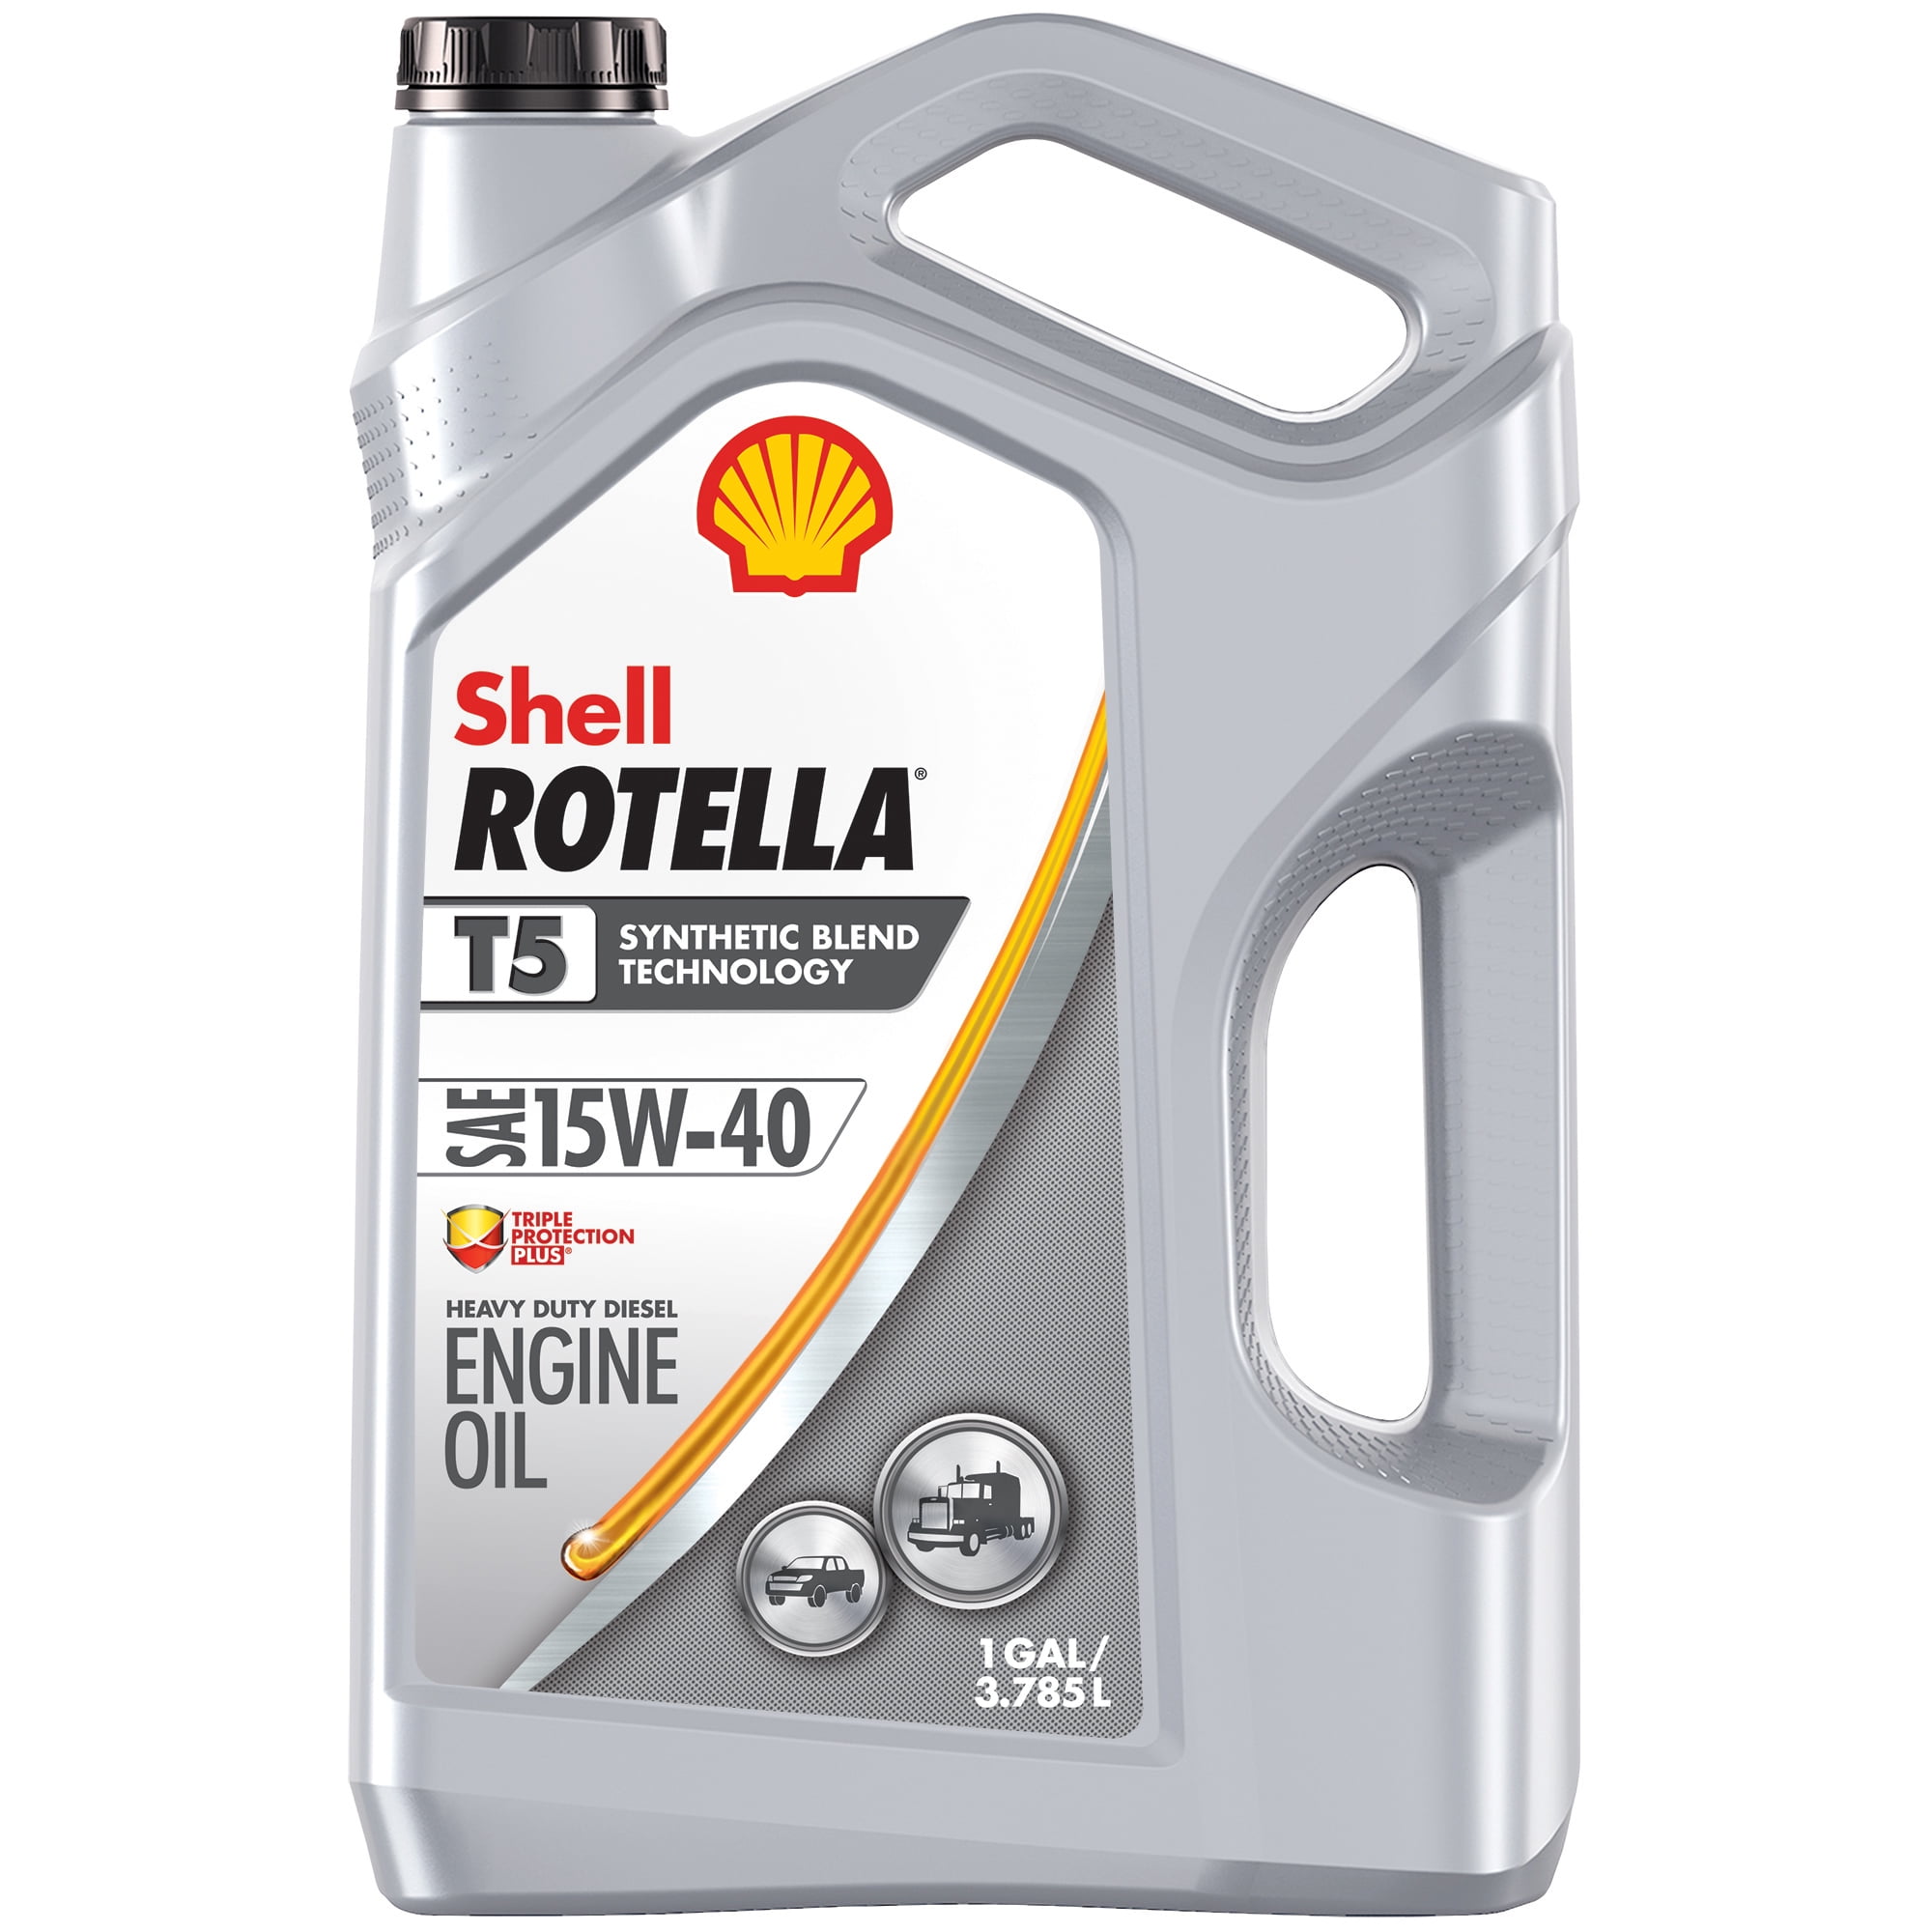 Shell Rotella T5 Synthetic Blend 15W-40 Diesel Engine Oil, 1 Gallon